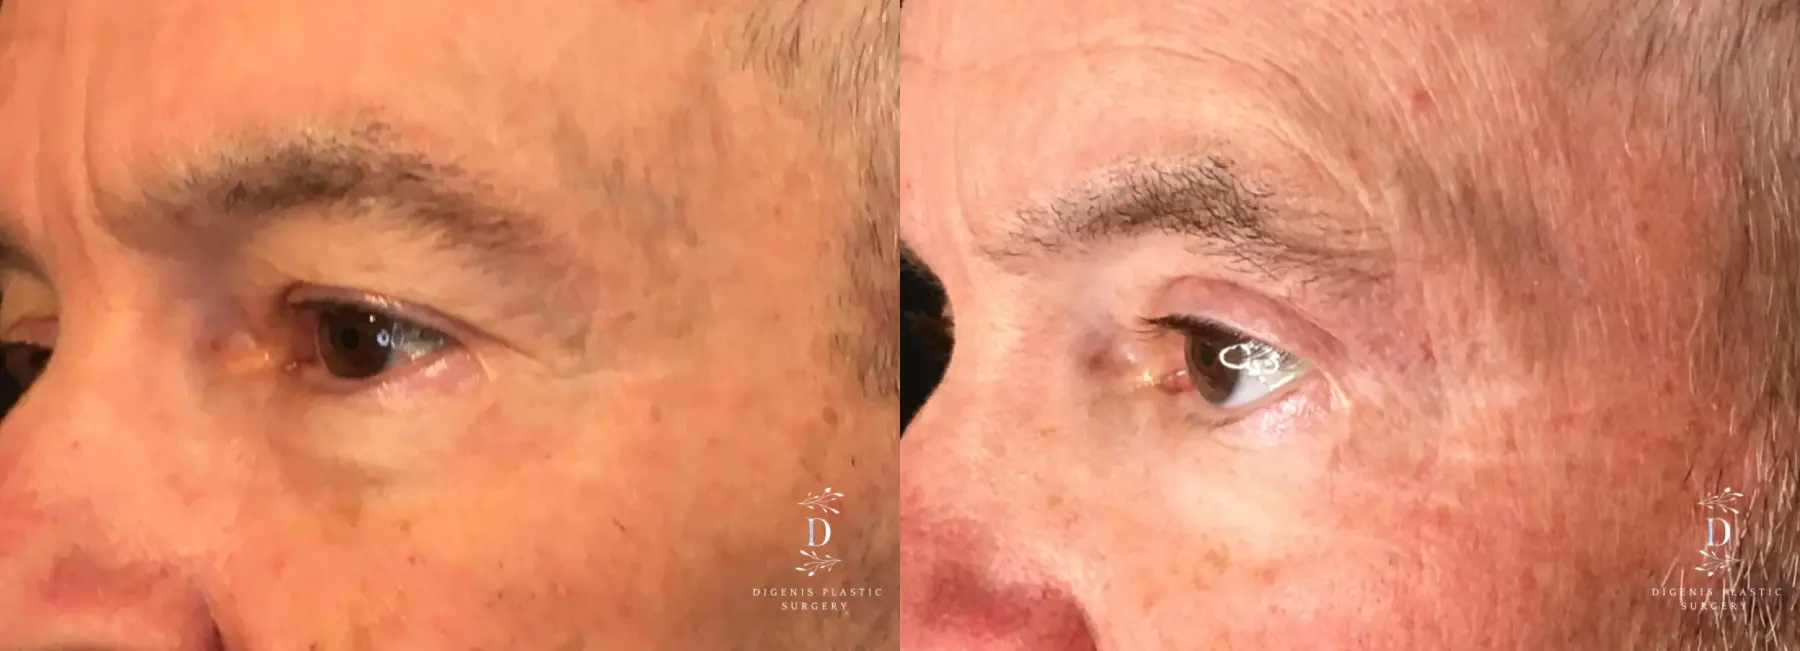 Eyelid Surgery: Patient 19 - Before and After 4